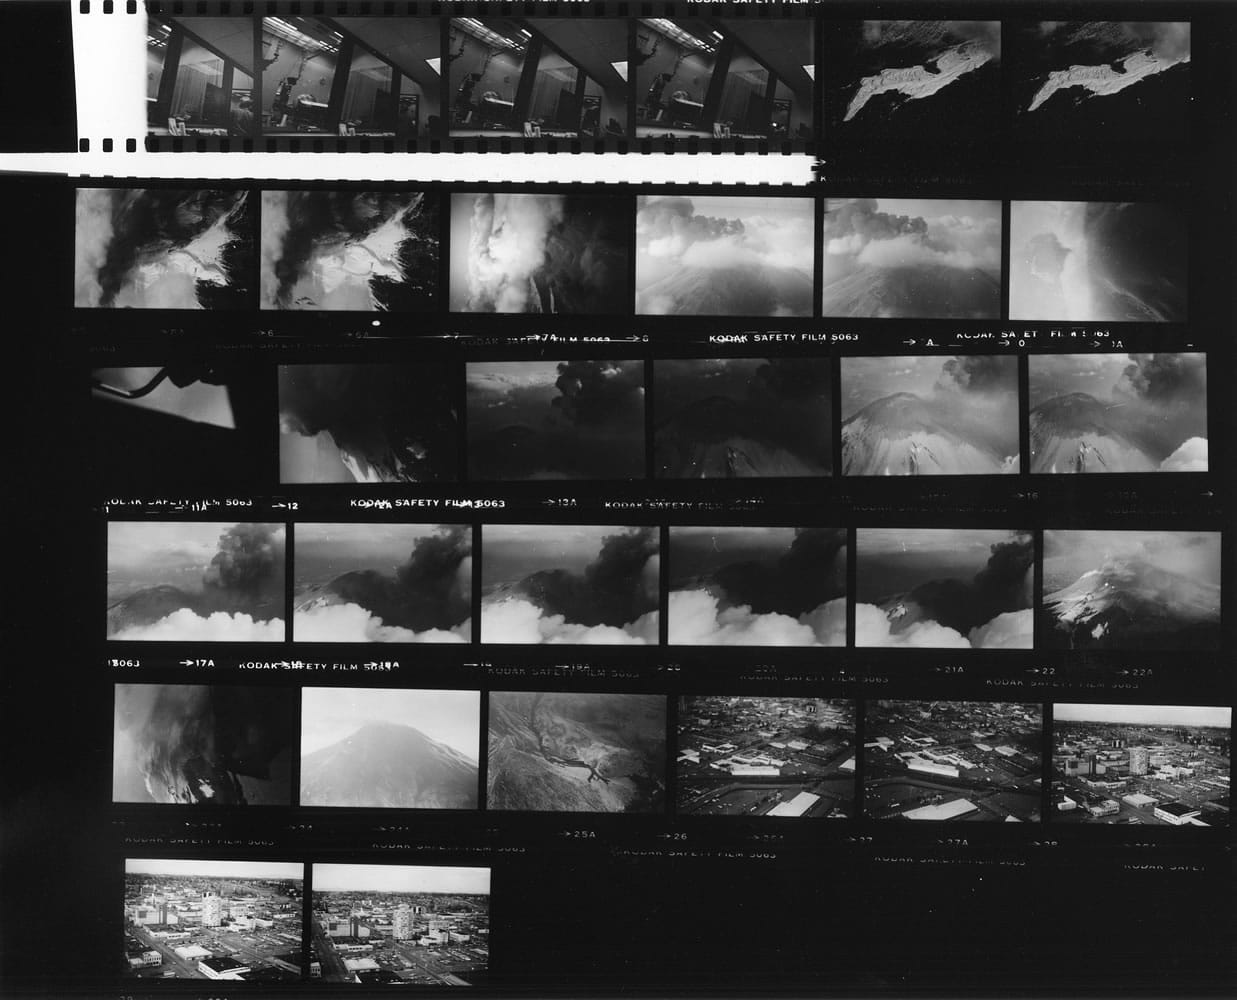 This is the contact sheet of a roll of film shot by Reid Blackburn in 1980 and developed recently.